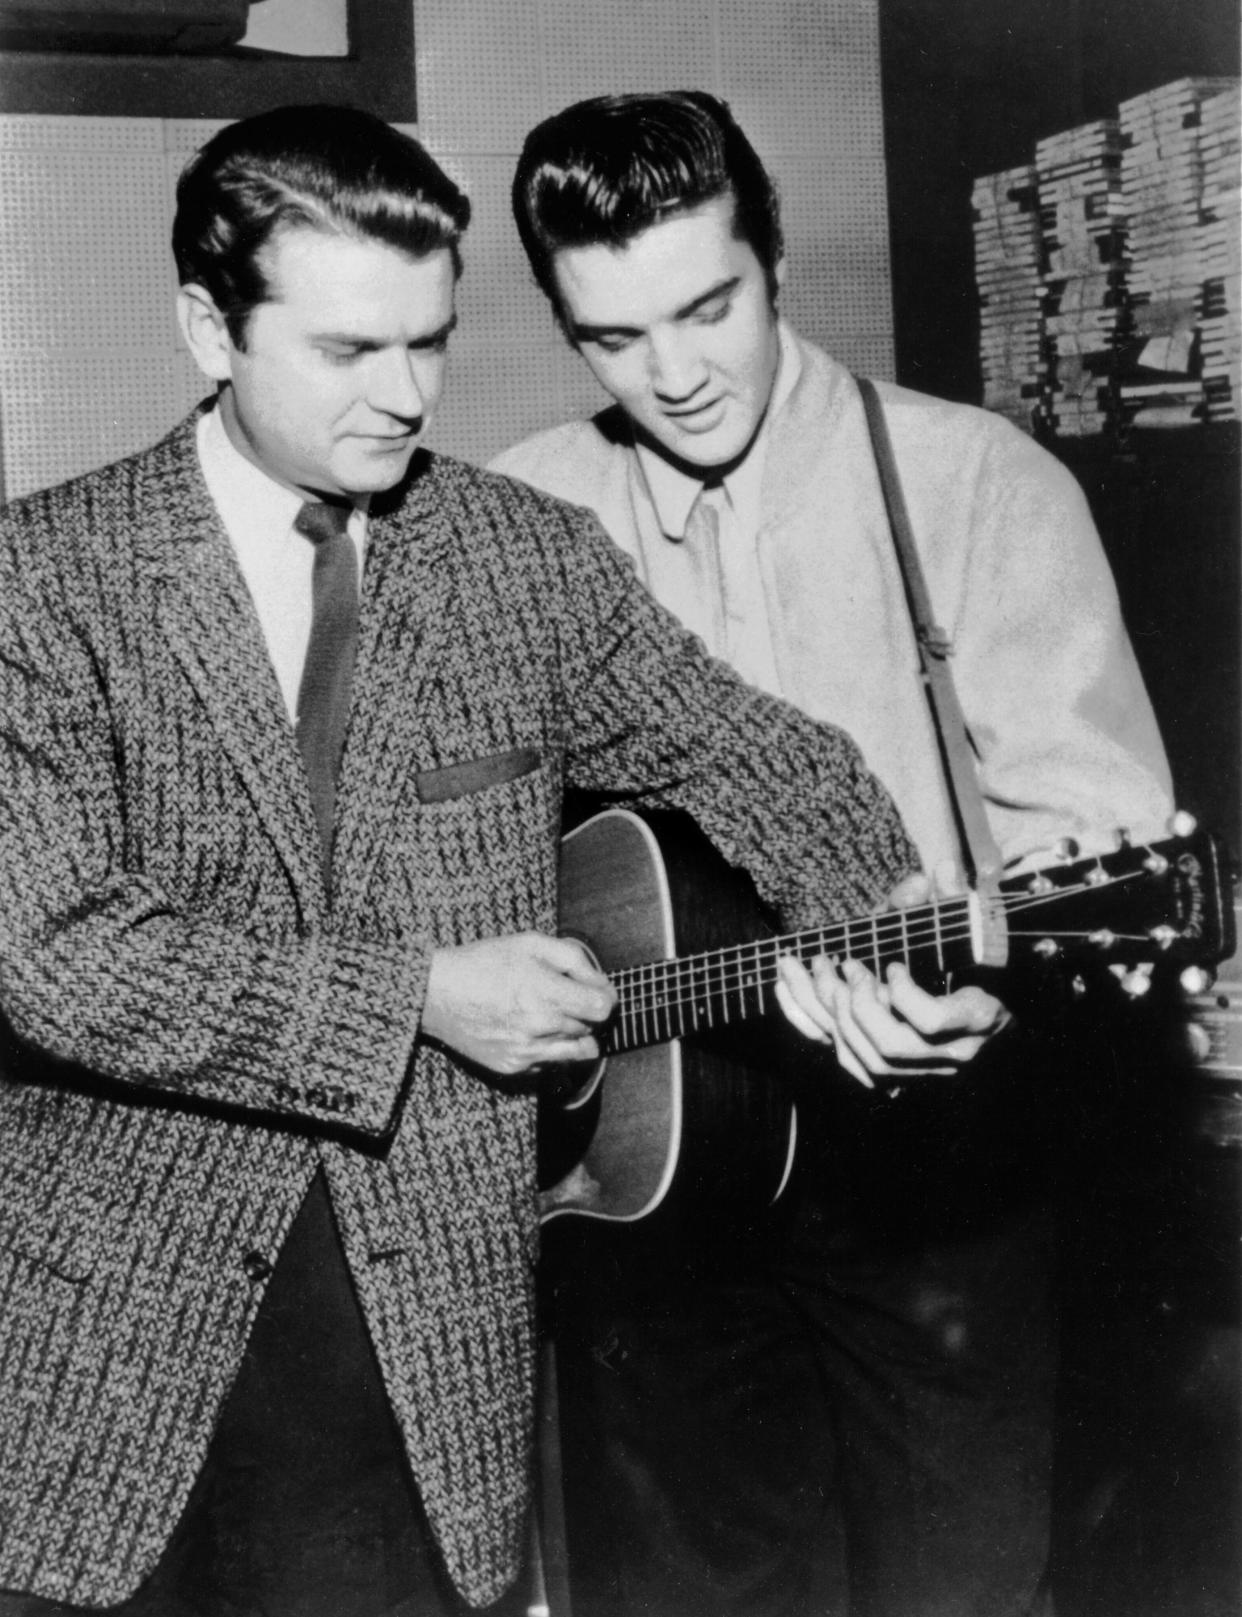 December 4, 1956: Sam Phillips and Elvis Presley when Elvis stopped by Phillips' studio and joined Johnny Cash, Carl Perkins and Jerry Lee Lewis for an impromptu jam session that became known as 